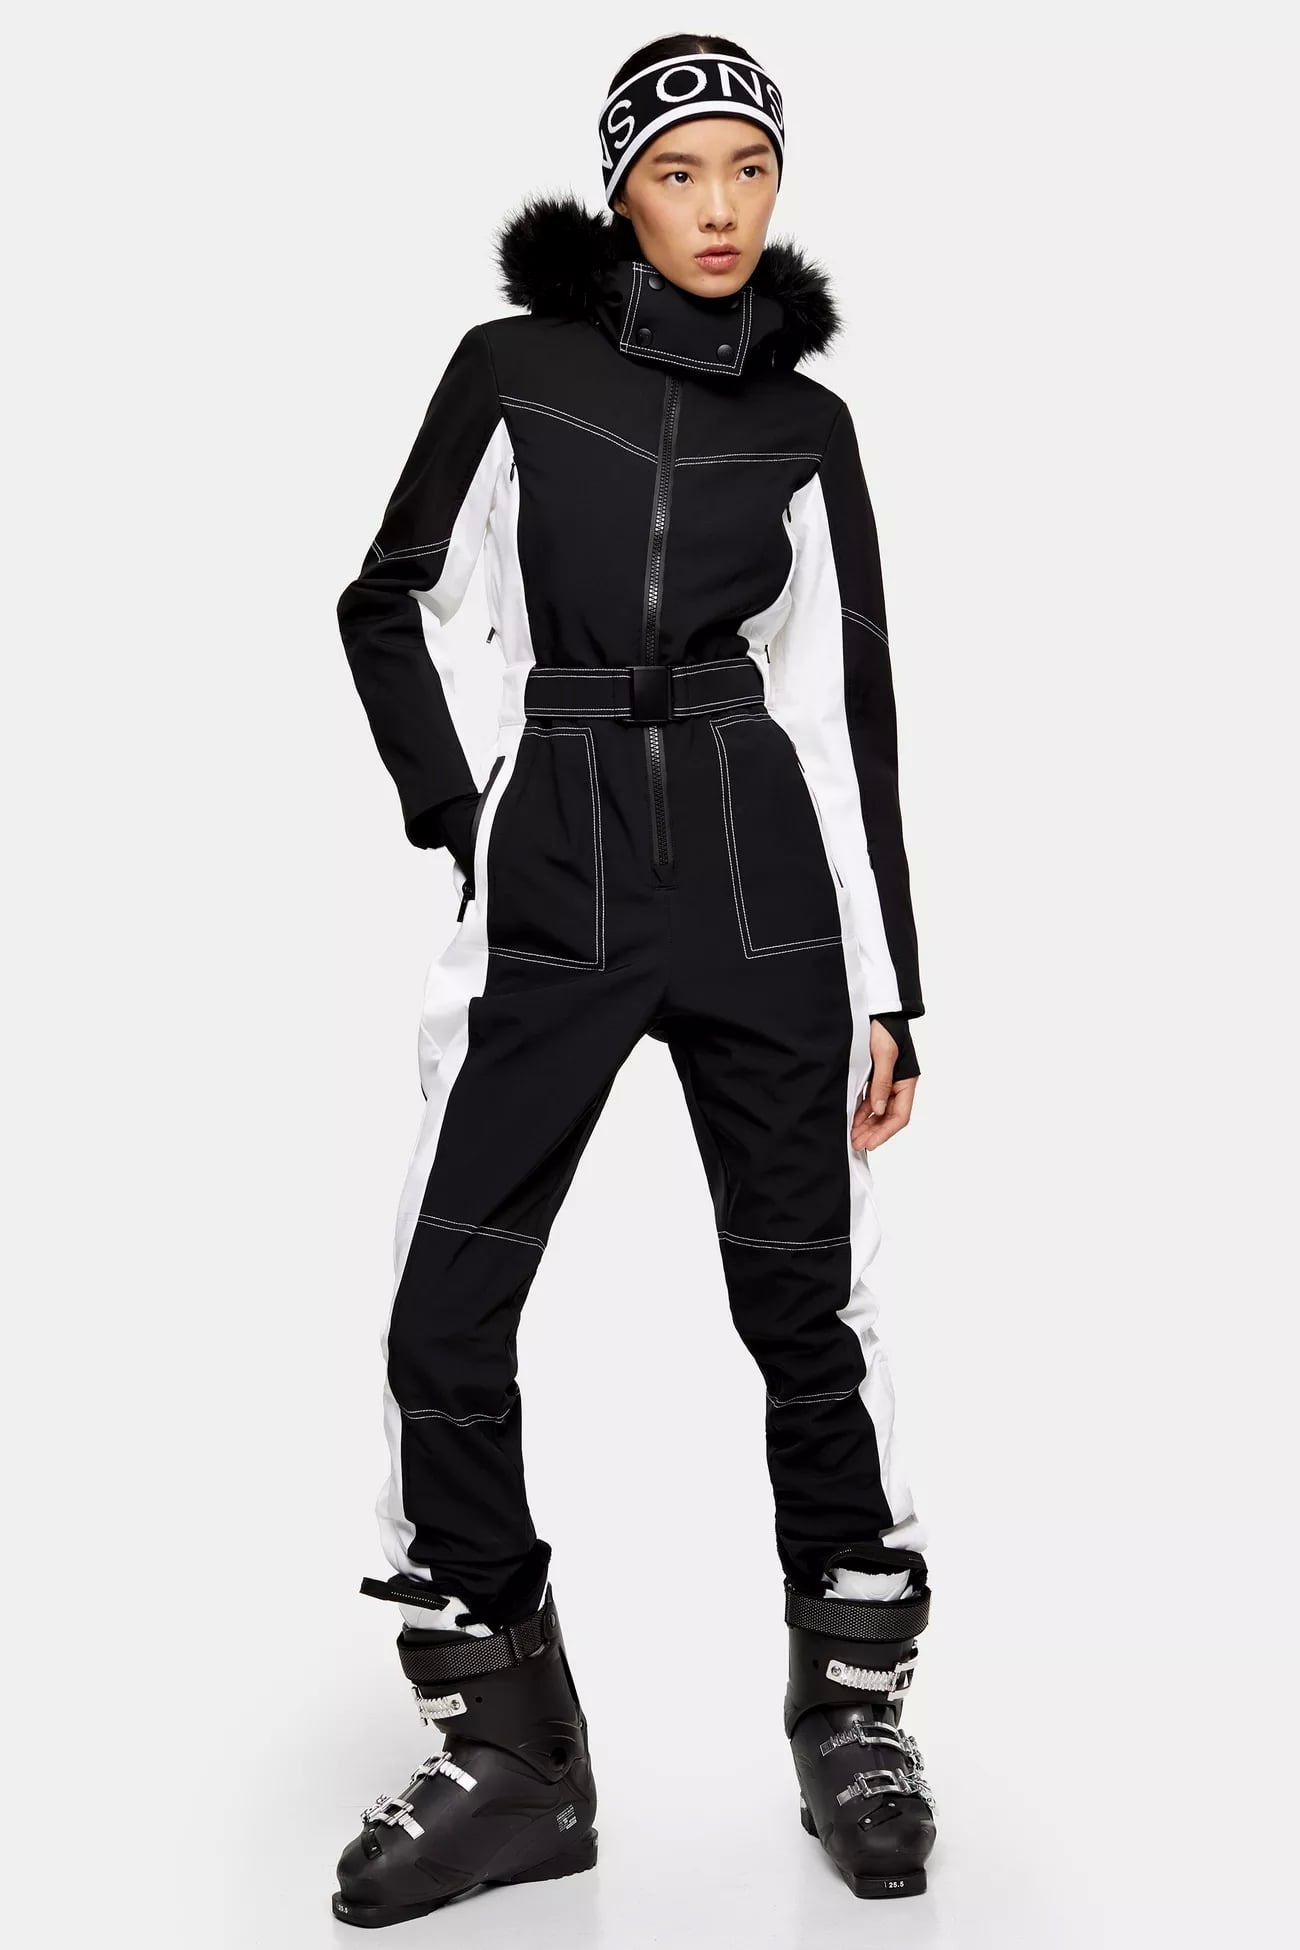 Topshop SNO Colour Block Ski Snow Suit, Shoop, Shoop, Shoop! Stylish Ski  Gear Fashion Girls (and Rachel Green) Would Approve Of